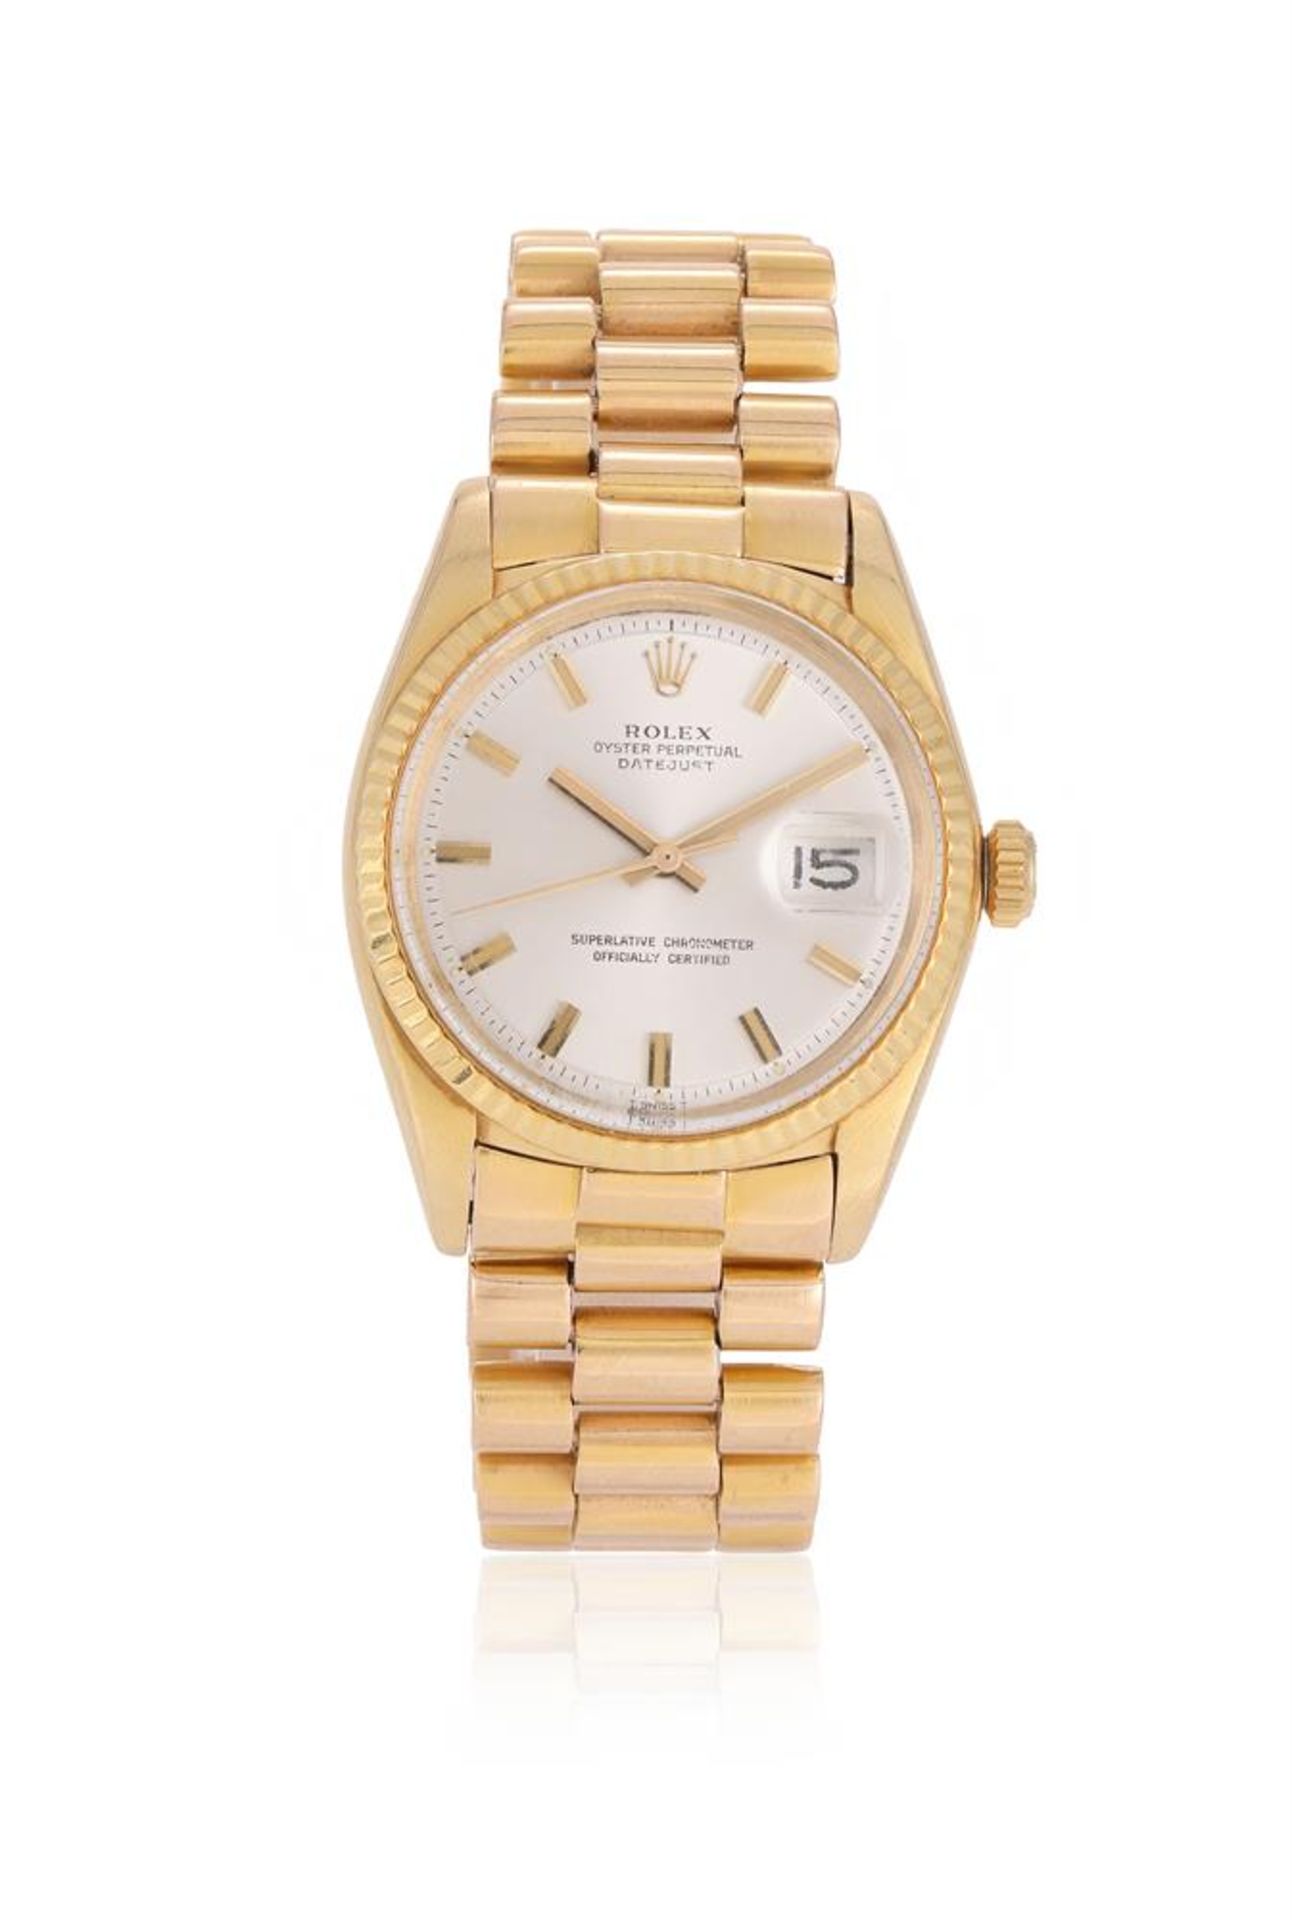 ROLEX, OYSTER PERPETUAL DATEJUST, REF. 1601, AN 18 CARAT GOLD BRACELET WATCH WITH DATE